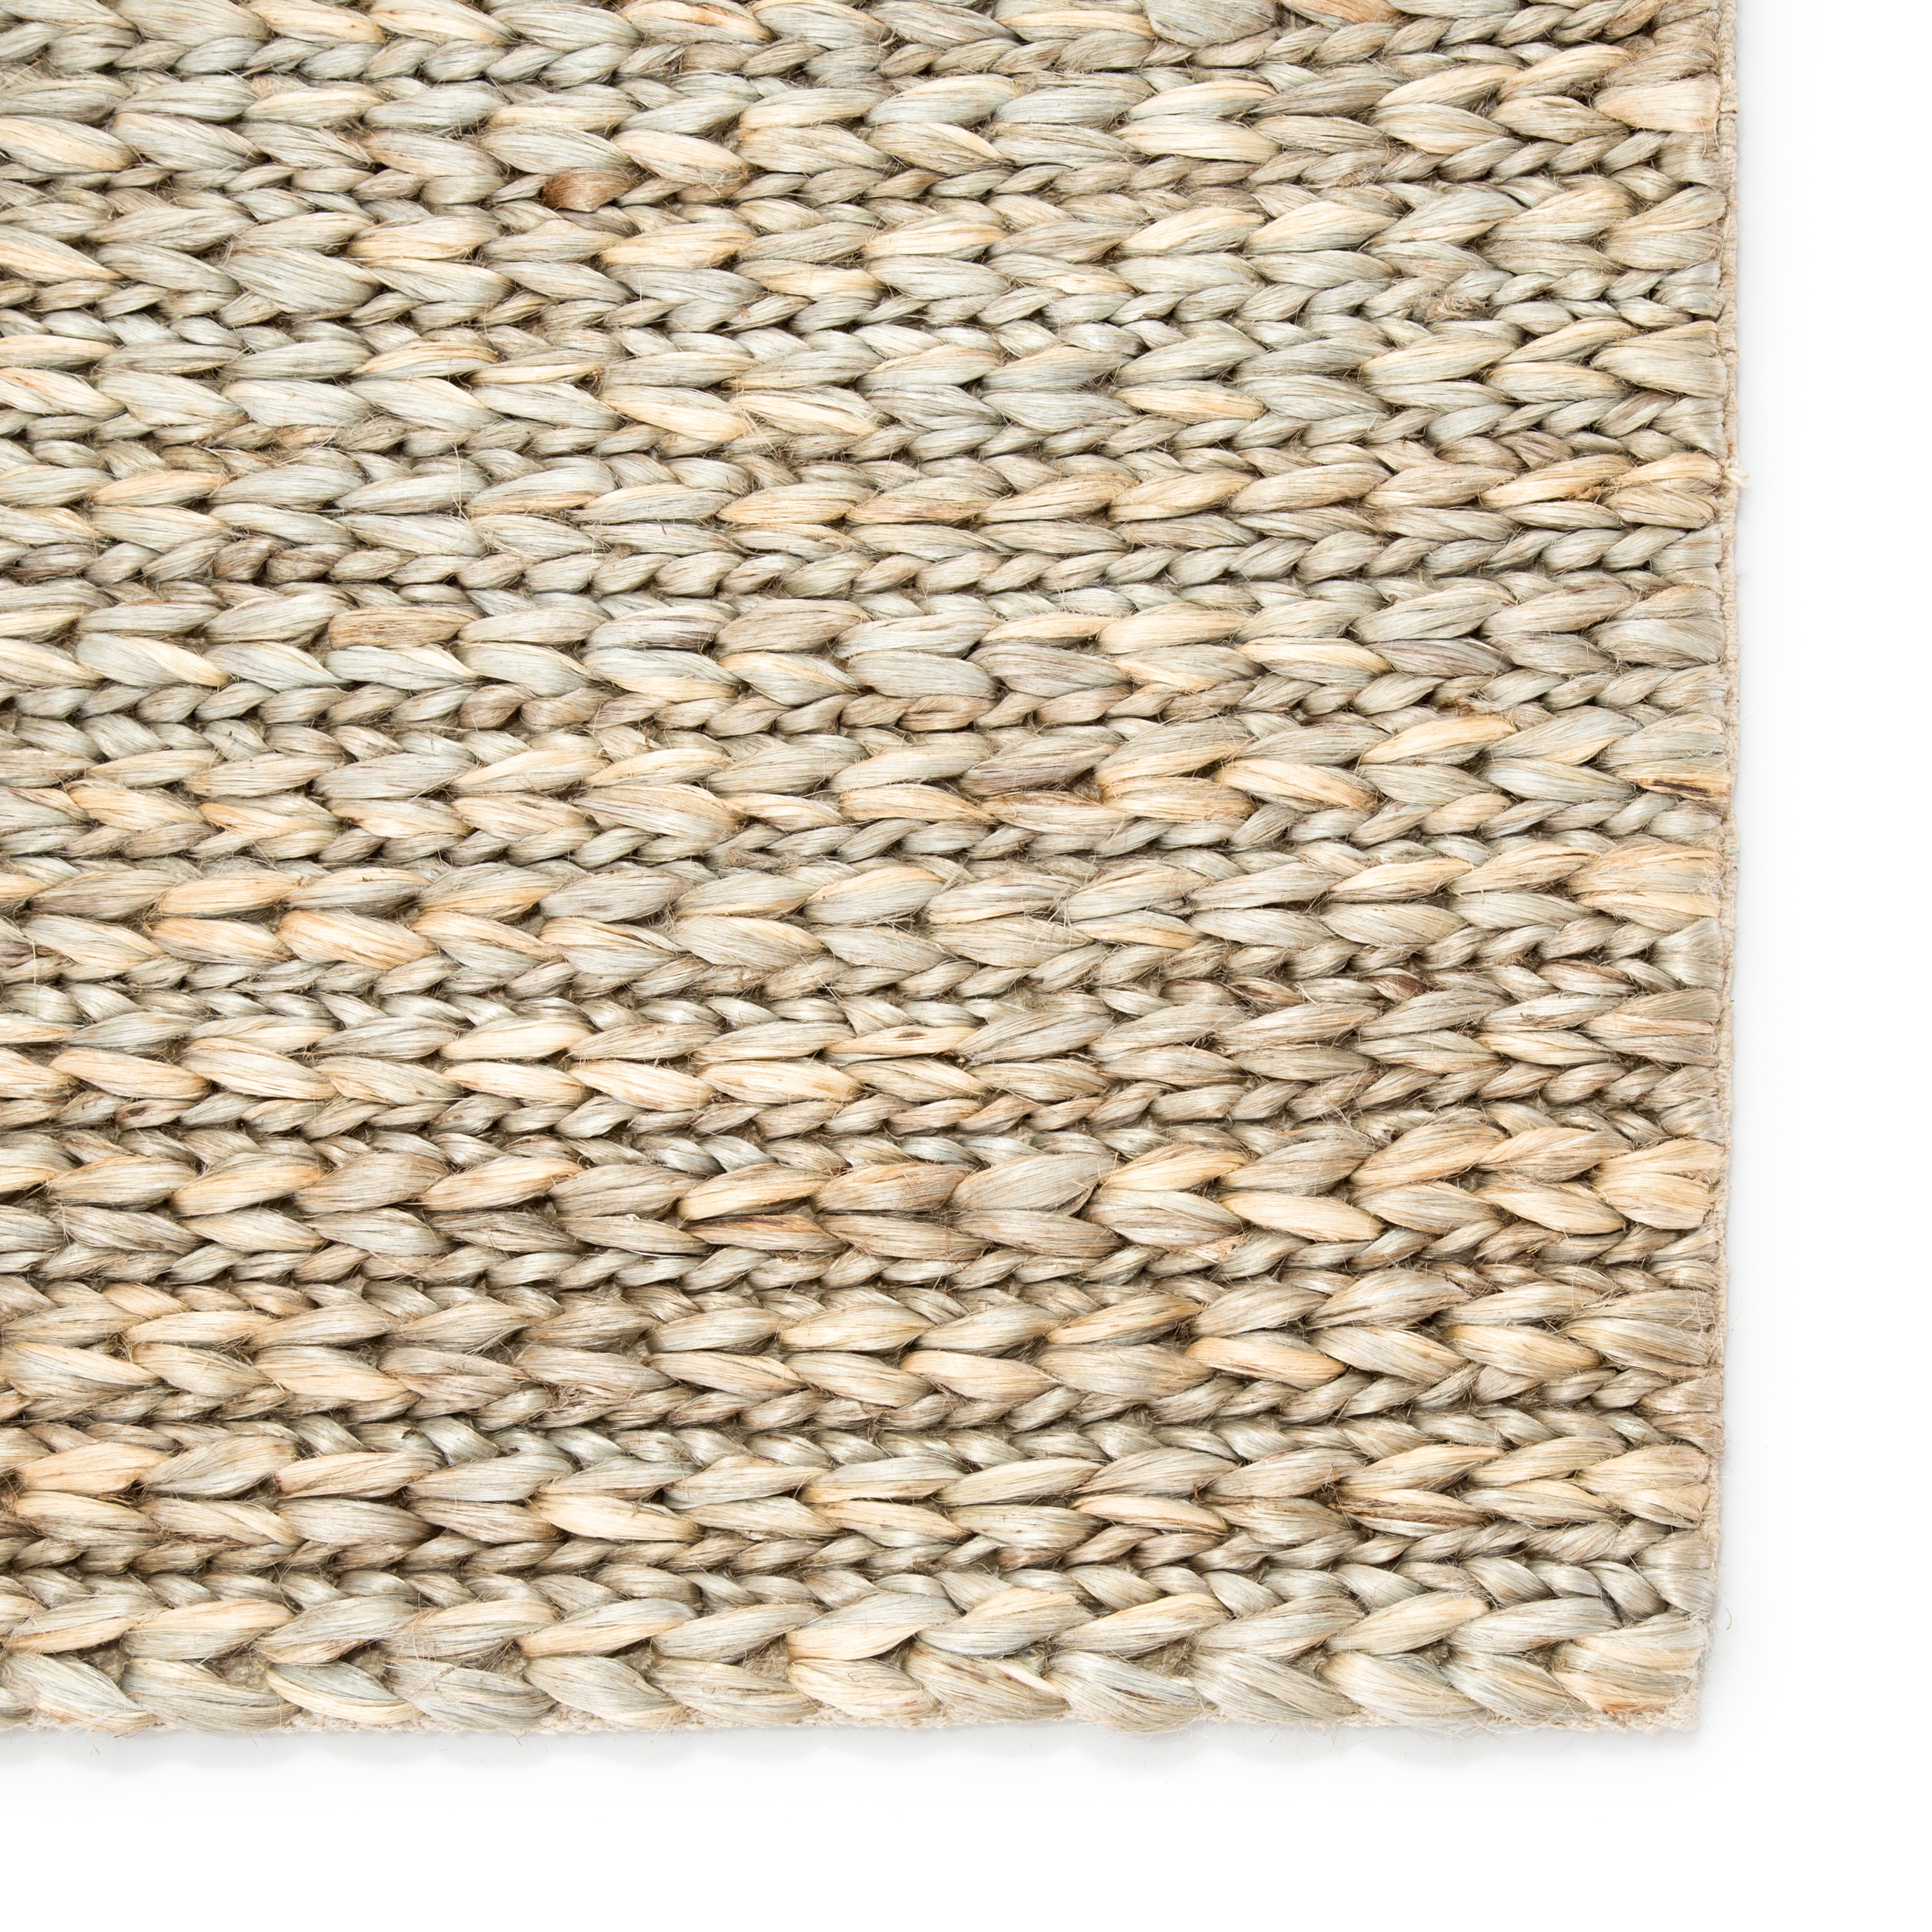 Calista Natural Solid Tan/ Greige Area Rug (8'X10') - Image 3